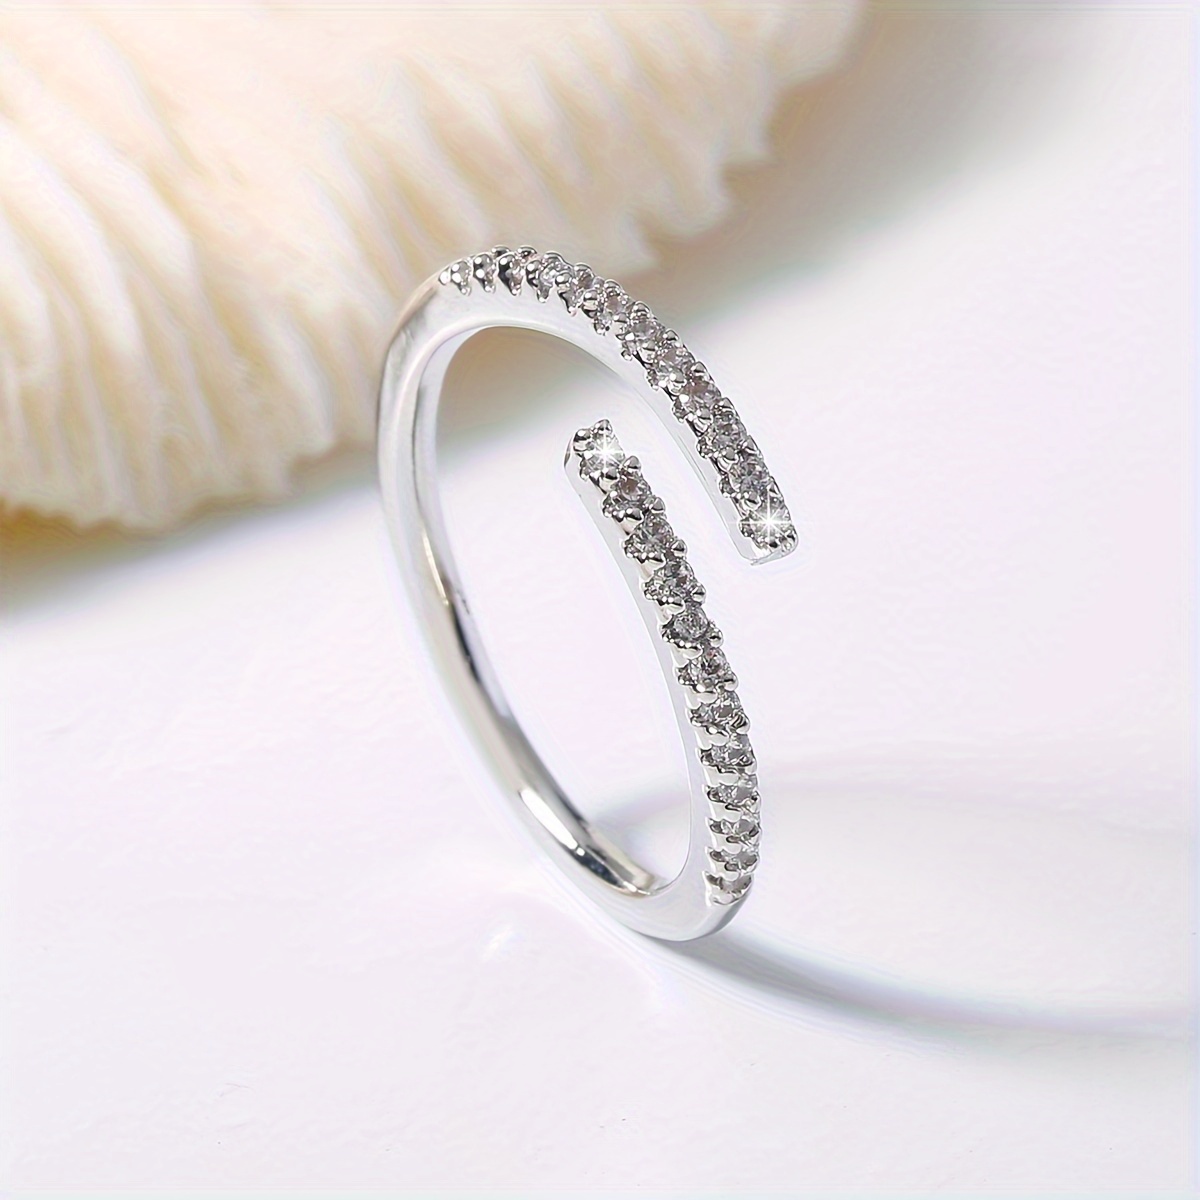 

1pc Chic Wrap Ring Paved Shining Zirconia Simple Design Represents Effortless Beauty Match Daily Outfits Party Accessory